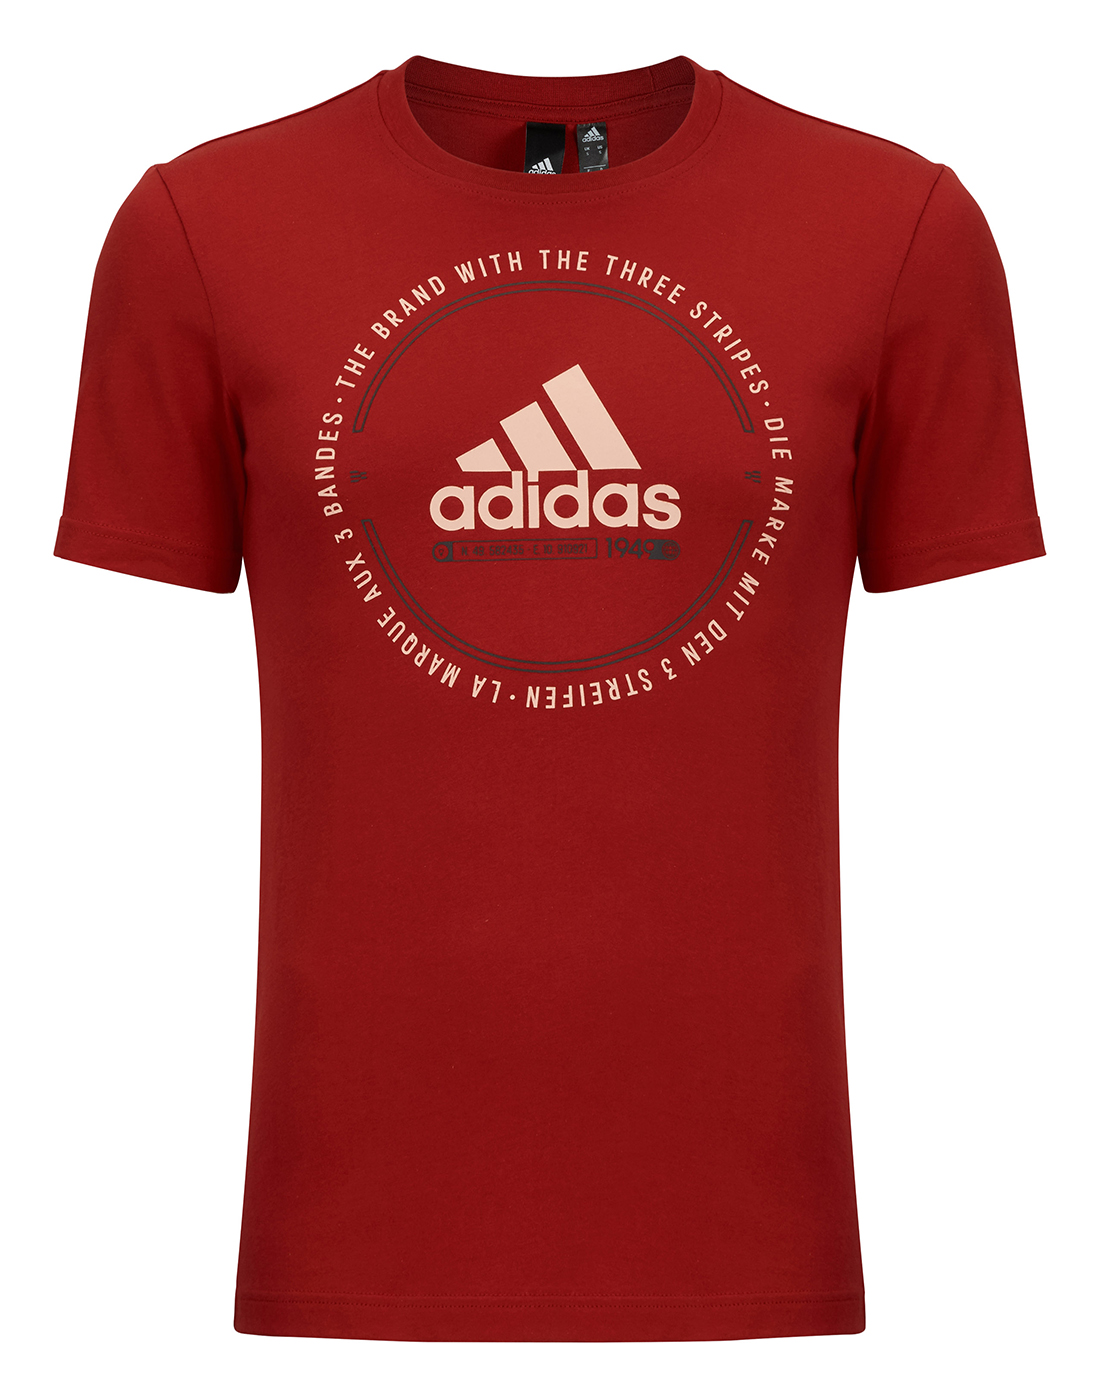 adidas Mens Emblem T-Shirt - Red | Life Style Sports IE